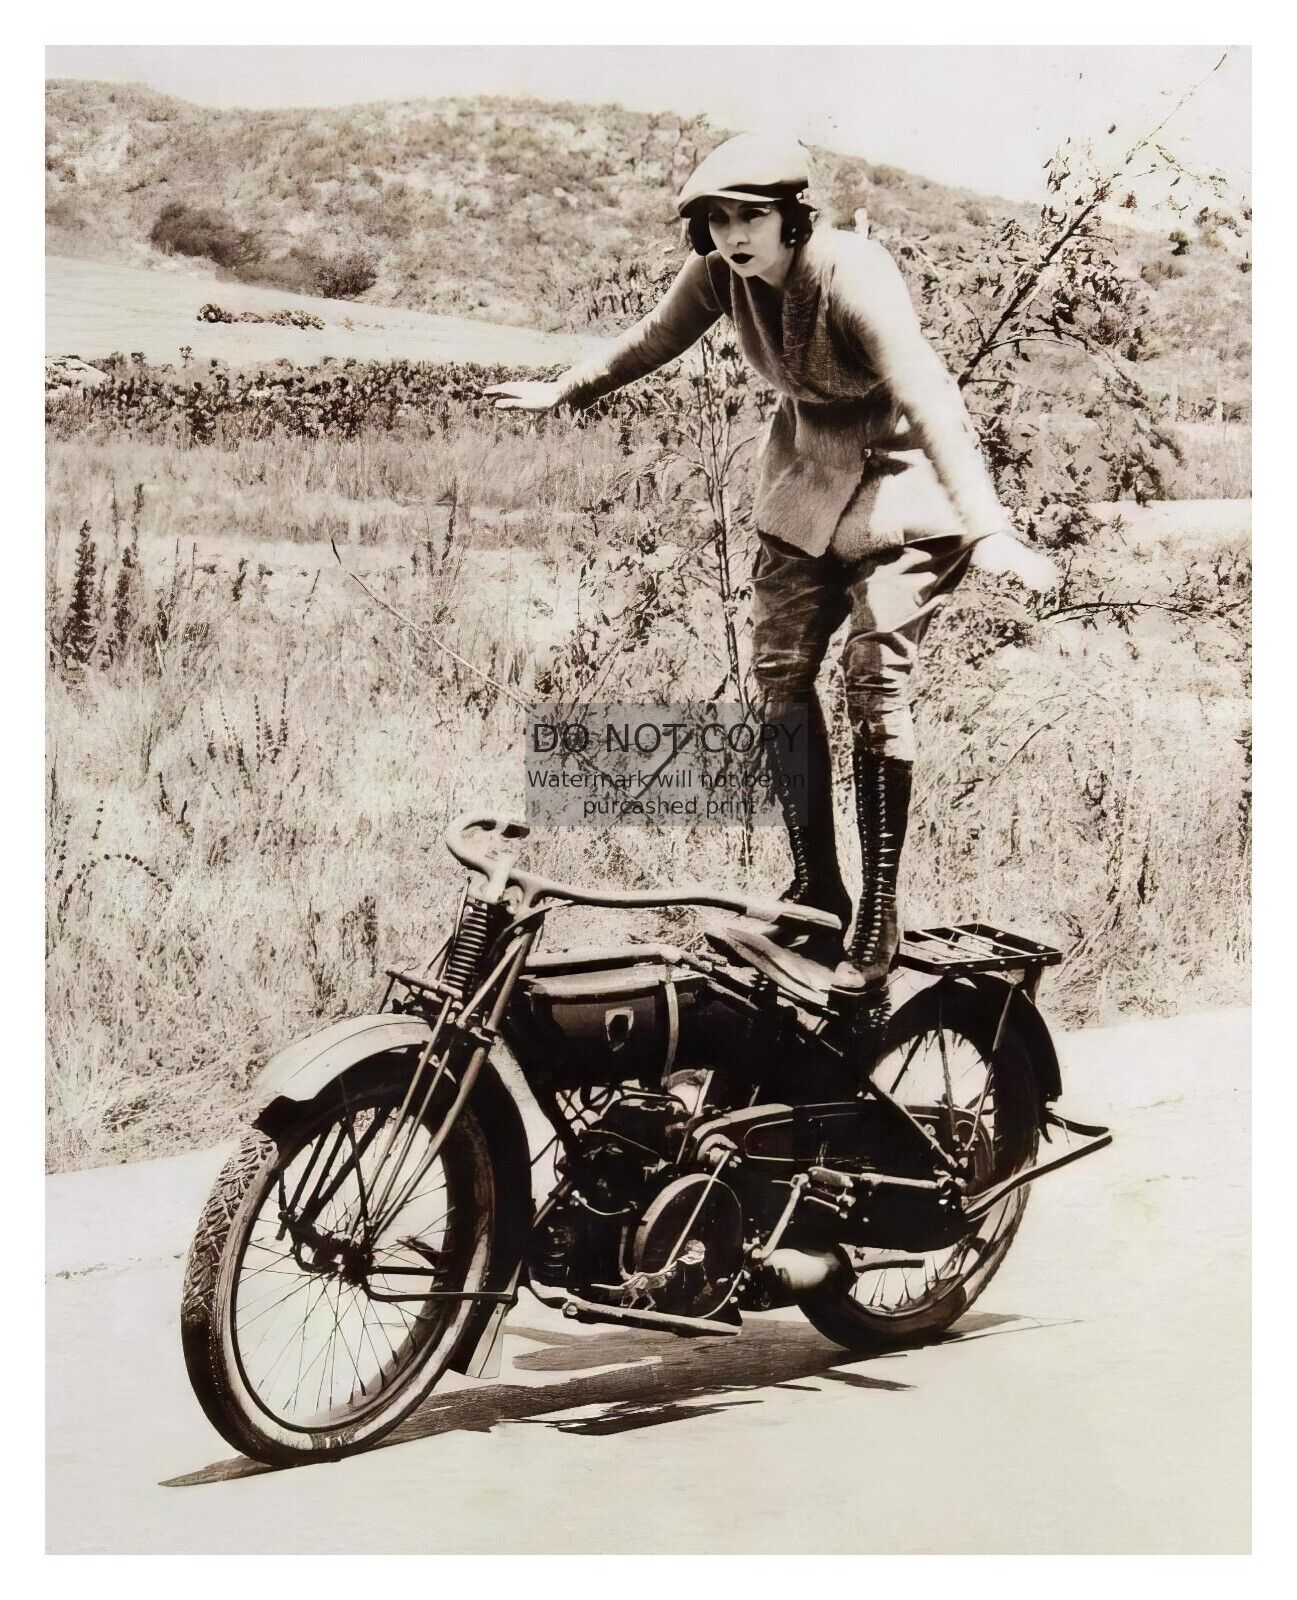 GIRL STANDING ON HER MOTORCYCLE 1920s 8X10 PHOTO